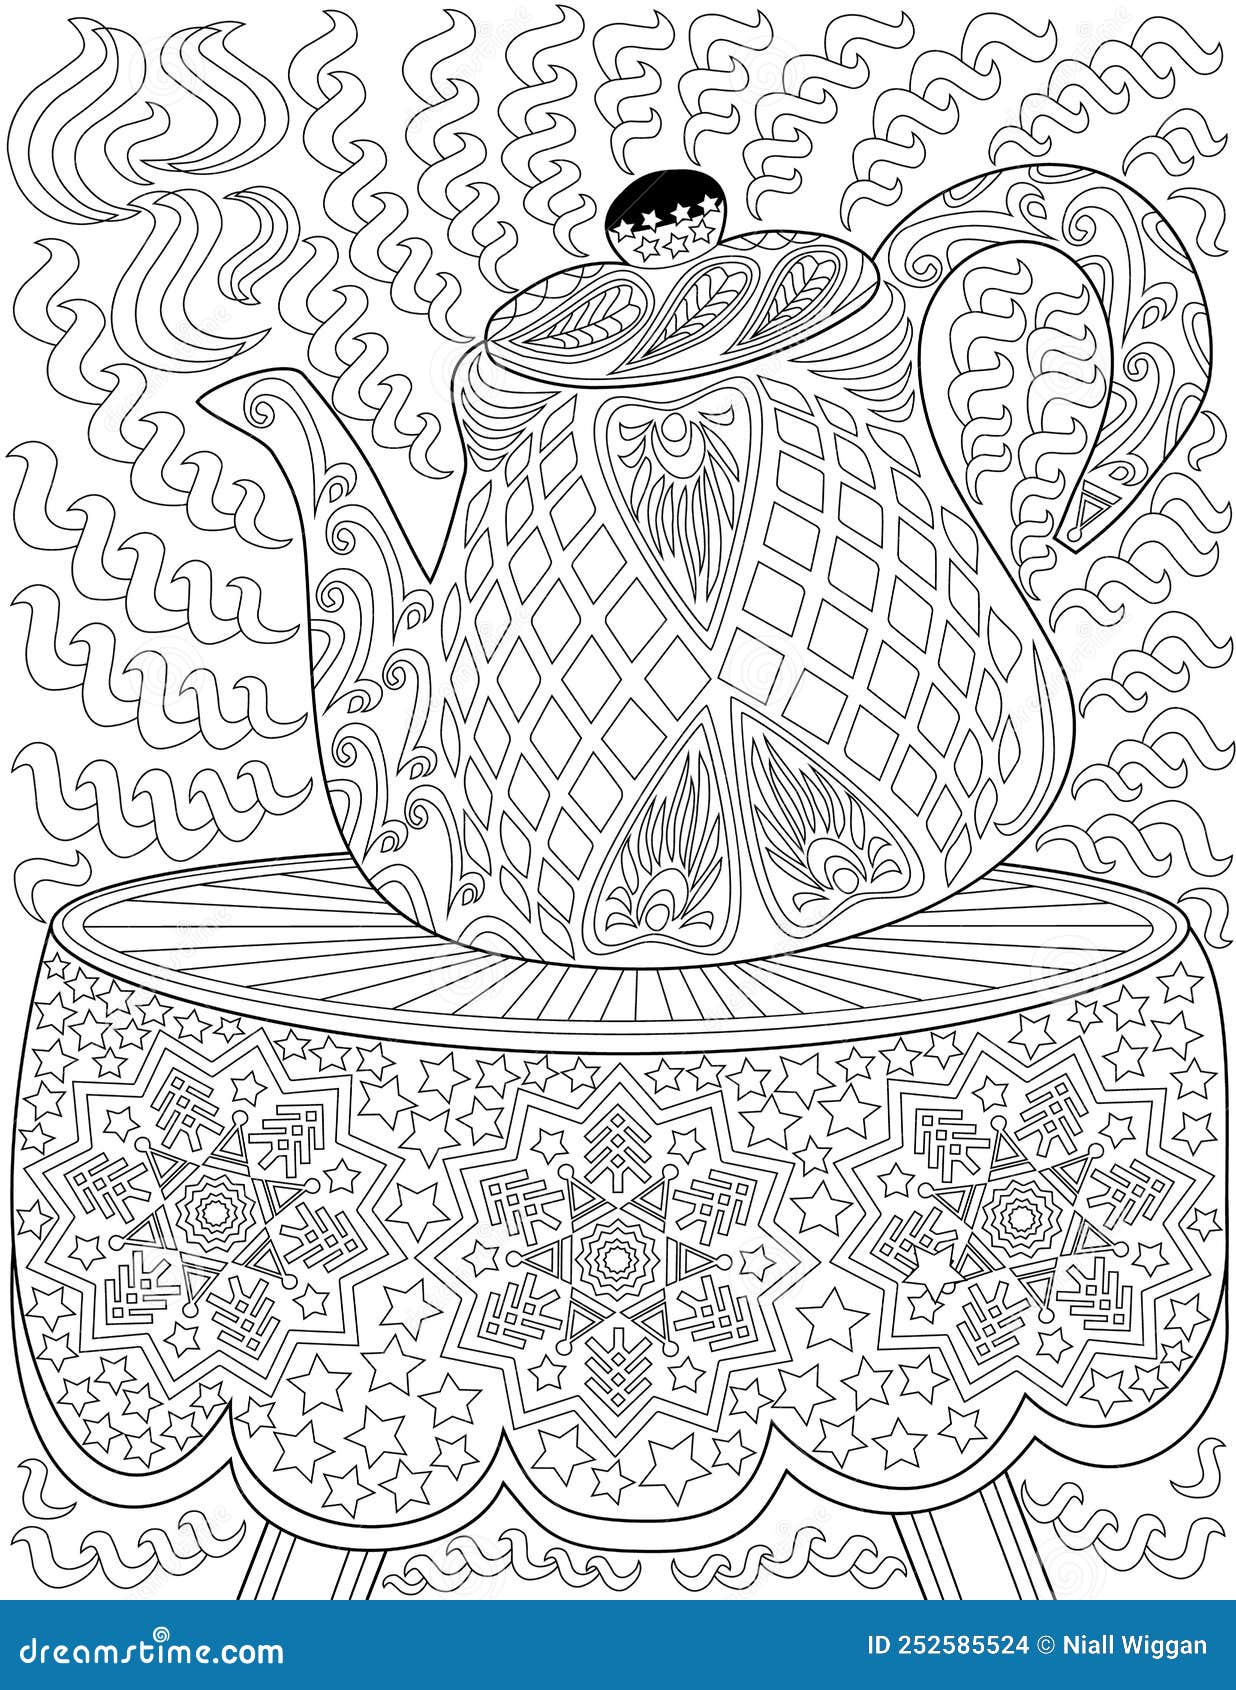 Coloring book page with teapot on table with cloth with snowflakes design sheet to be colored with kettle on surface stock photo